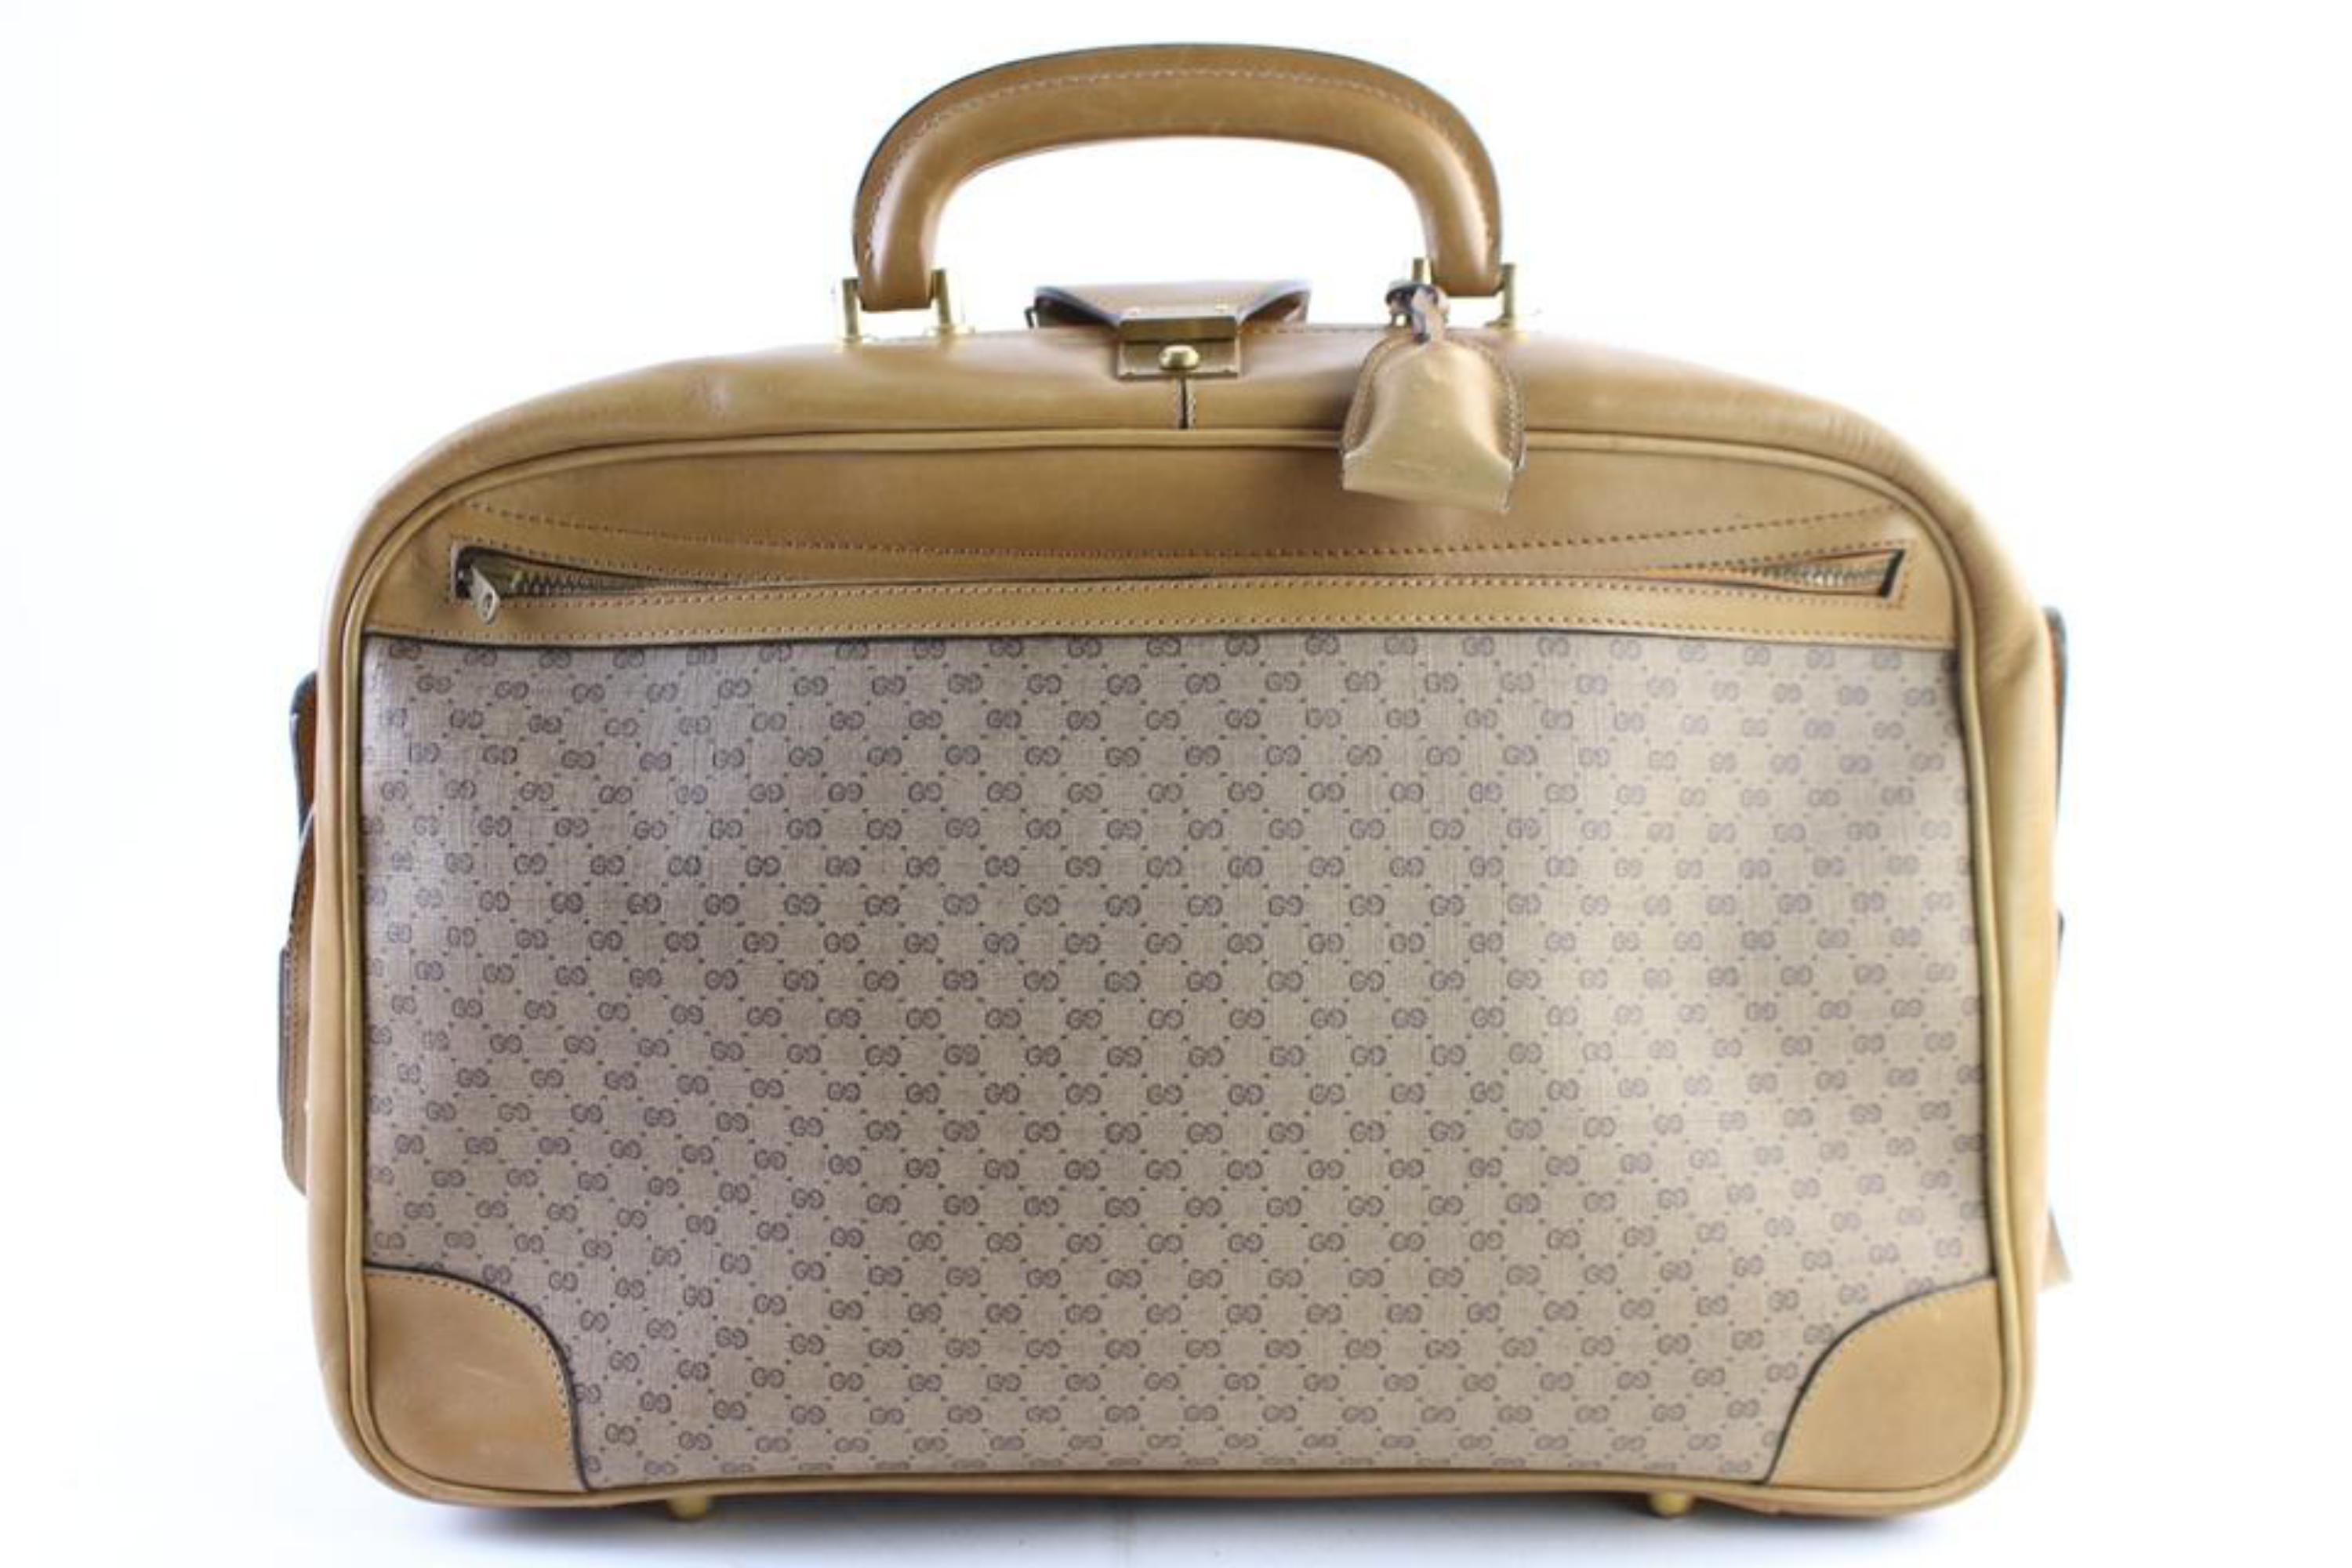 Gucci Monogram Gg 2way Web Luggage 15gr0323 Coated Canvas Weekend/Travel Bag For Sale 3